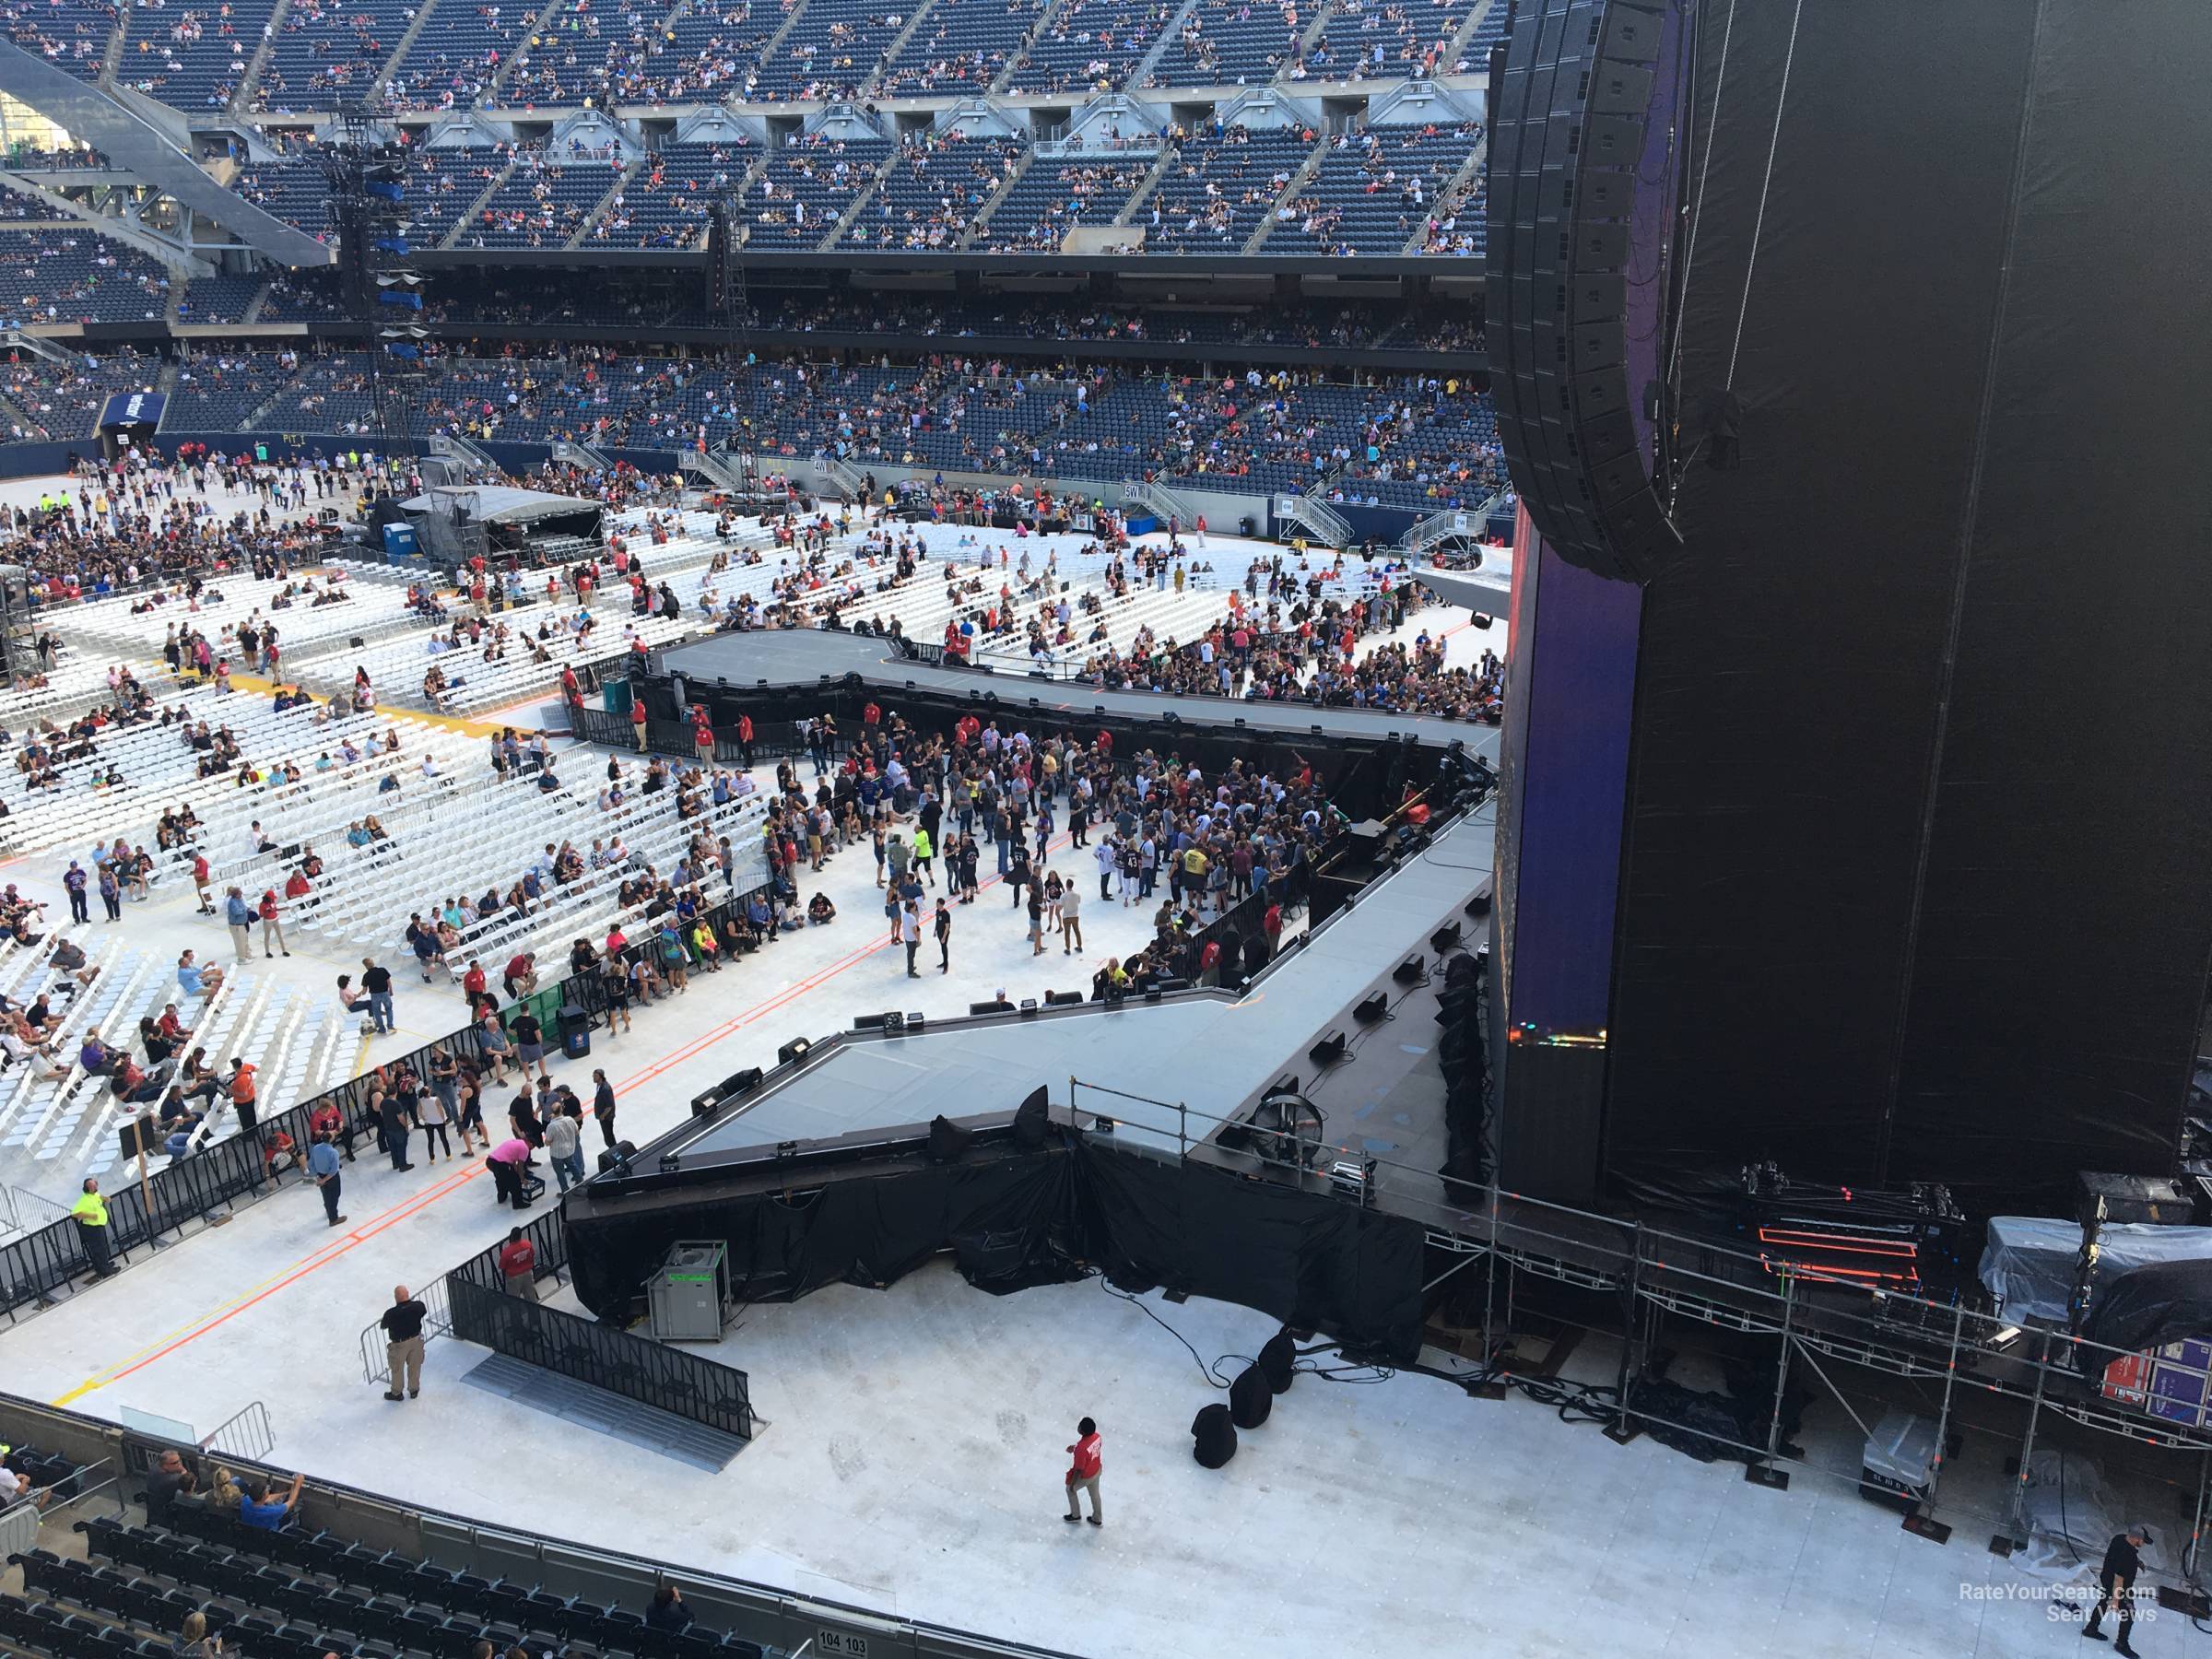 section 303, row 2 seat view  for concert - soldier field